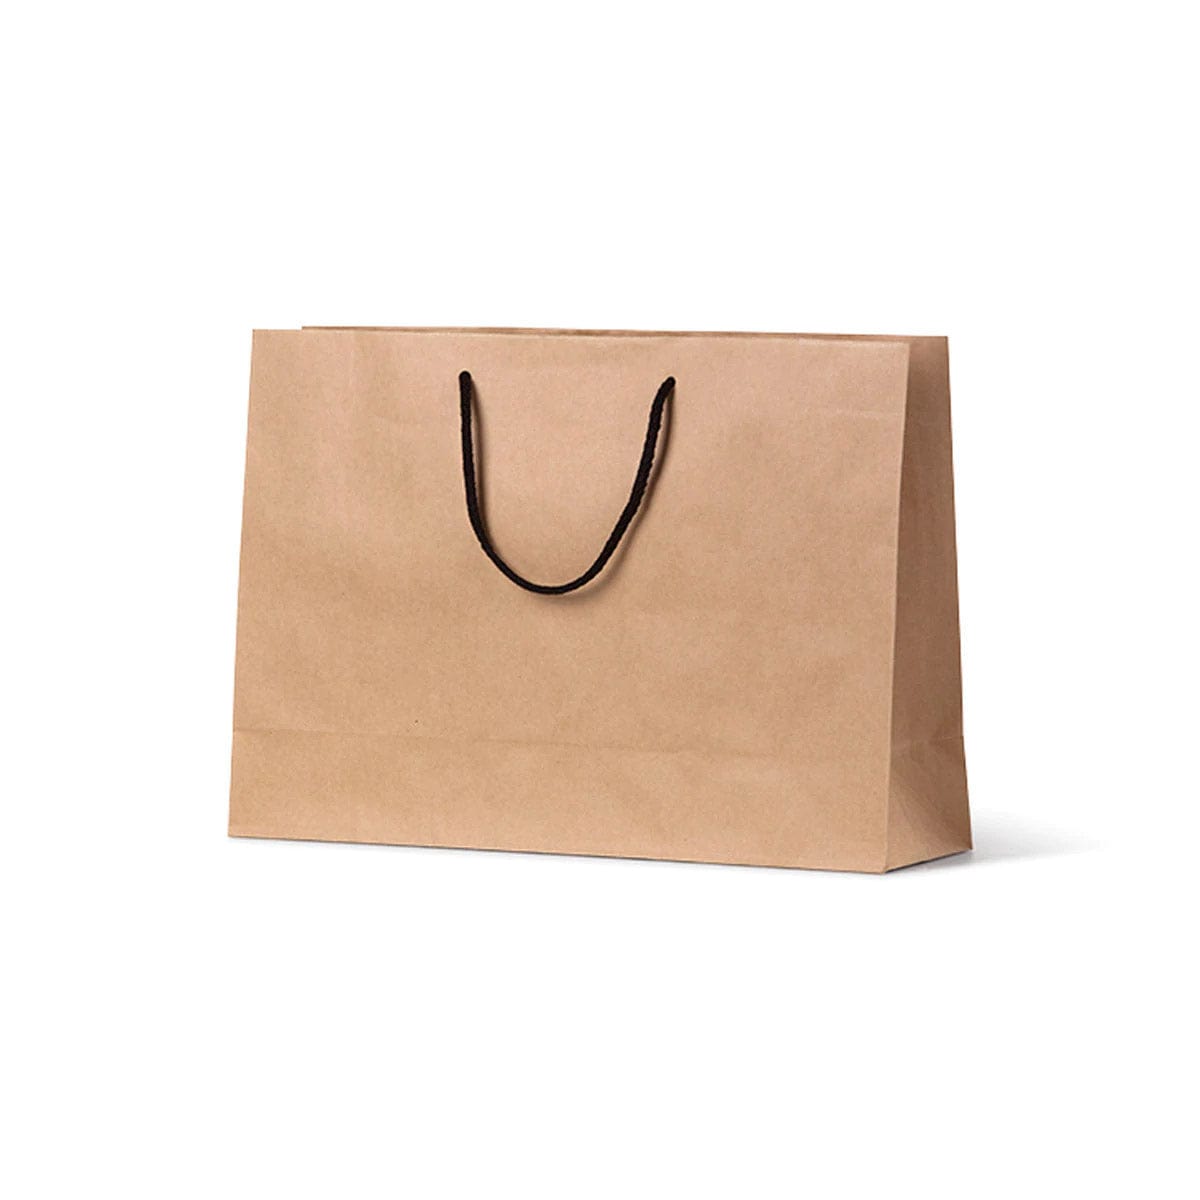 NEON - Deluxe Brown Kraft Paper Bag - Small Boutique with black handle